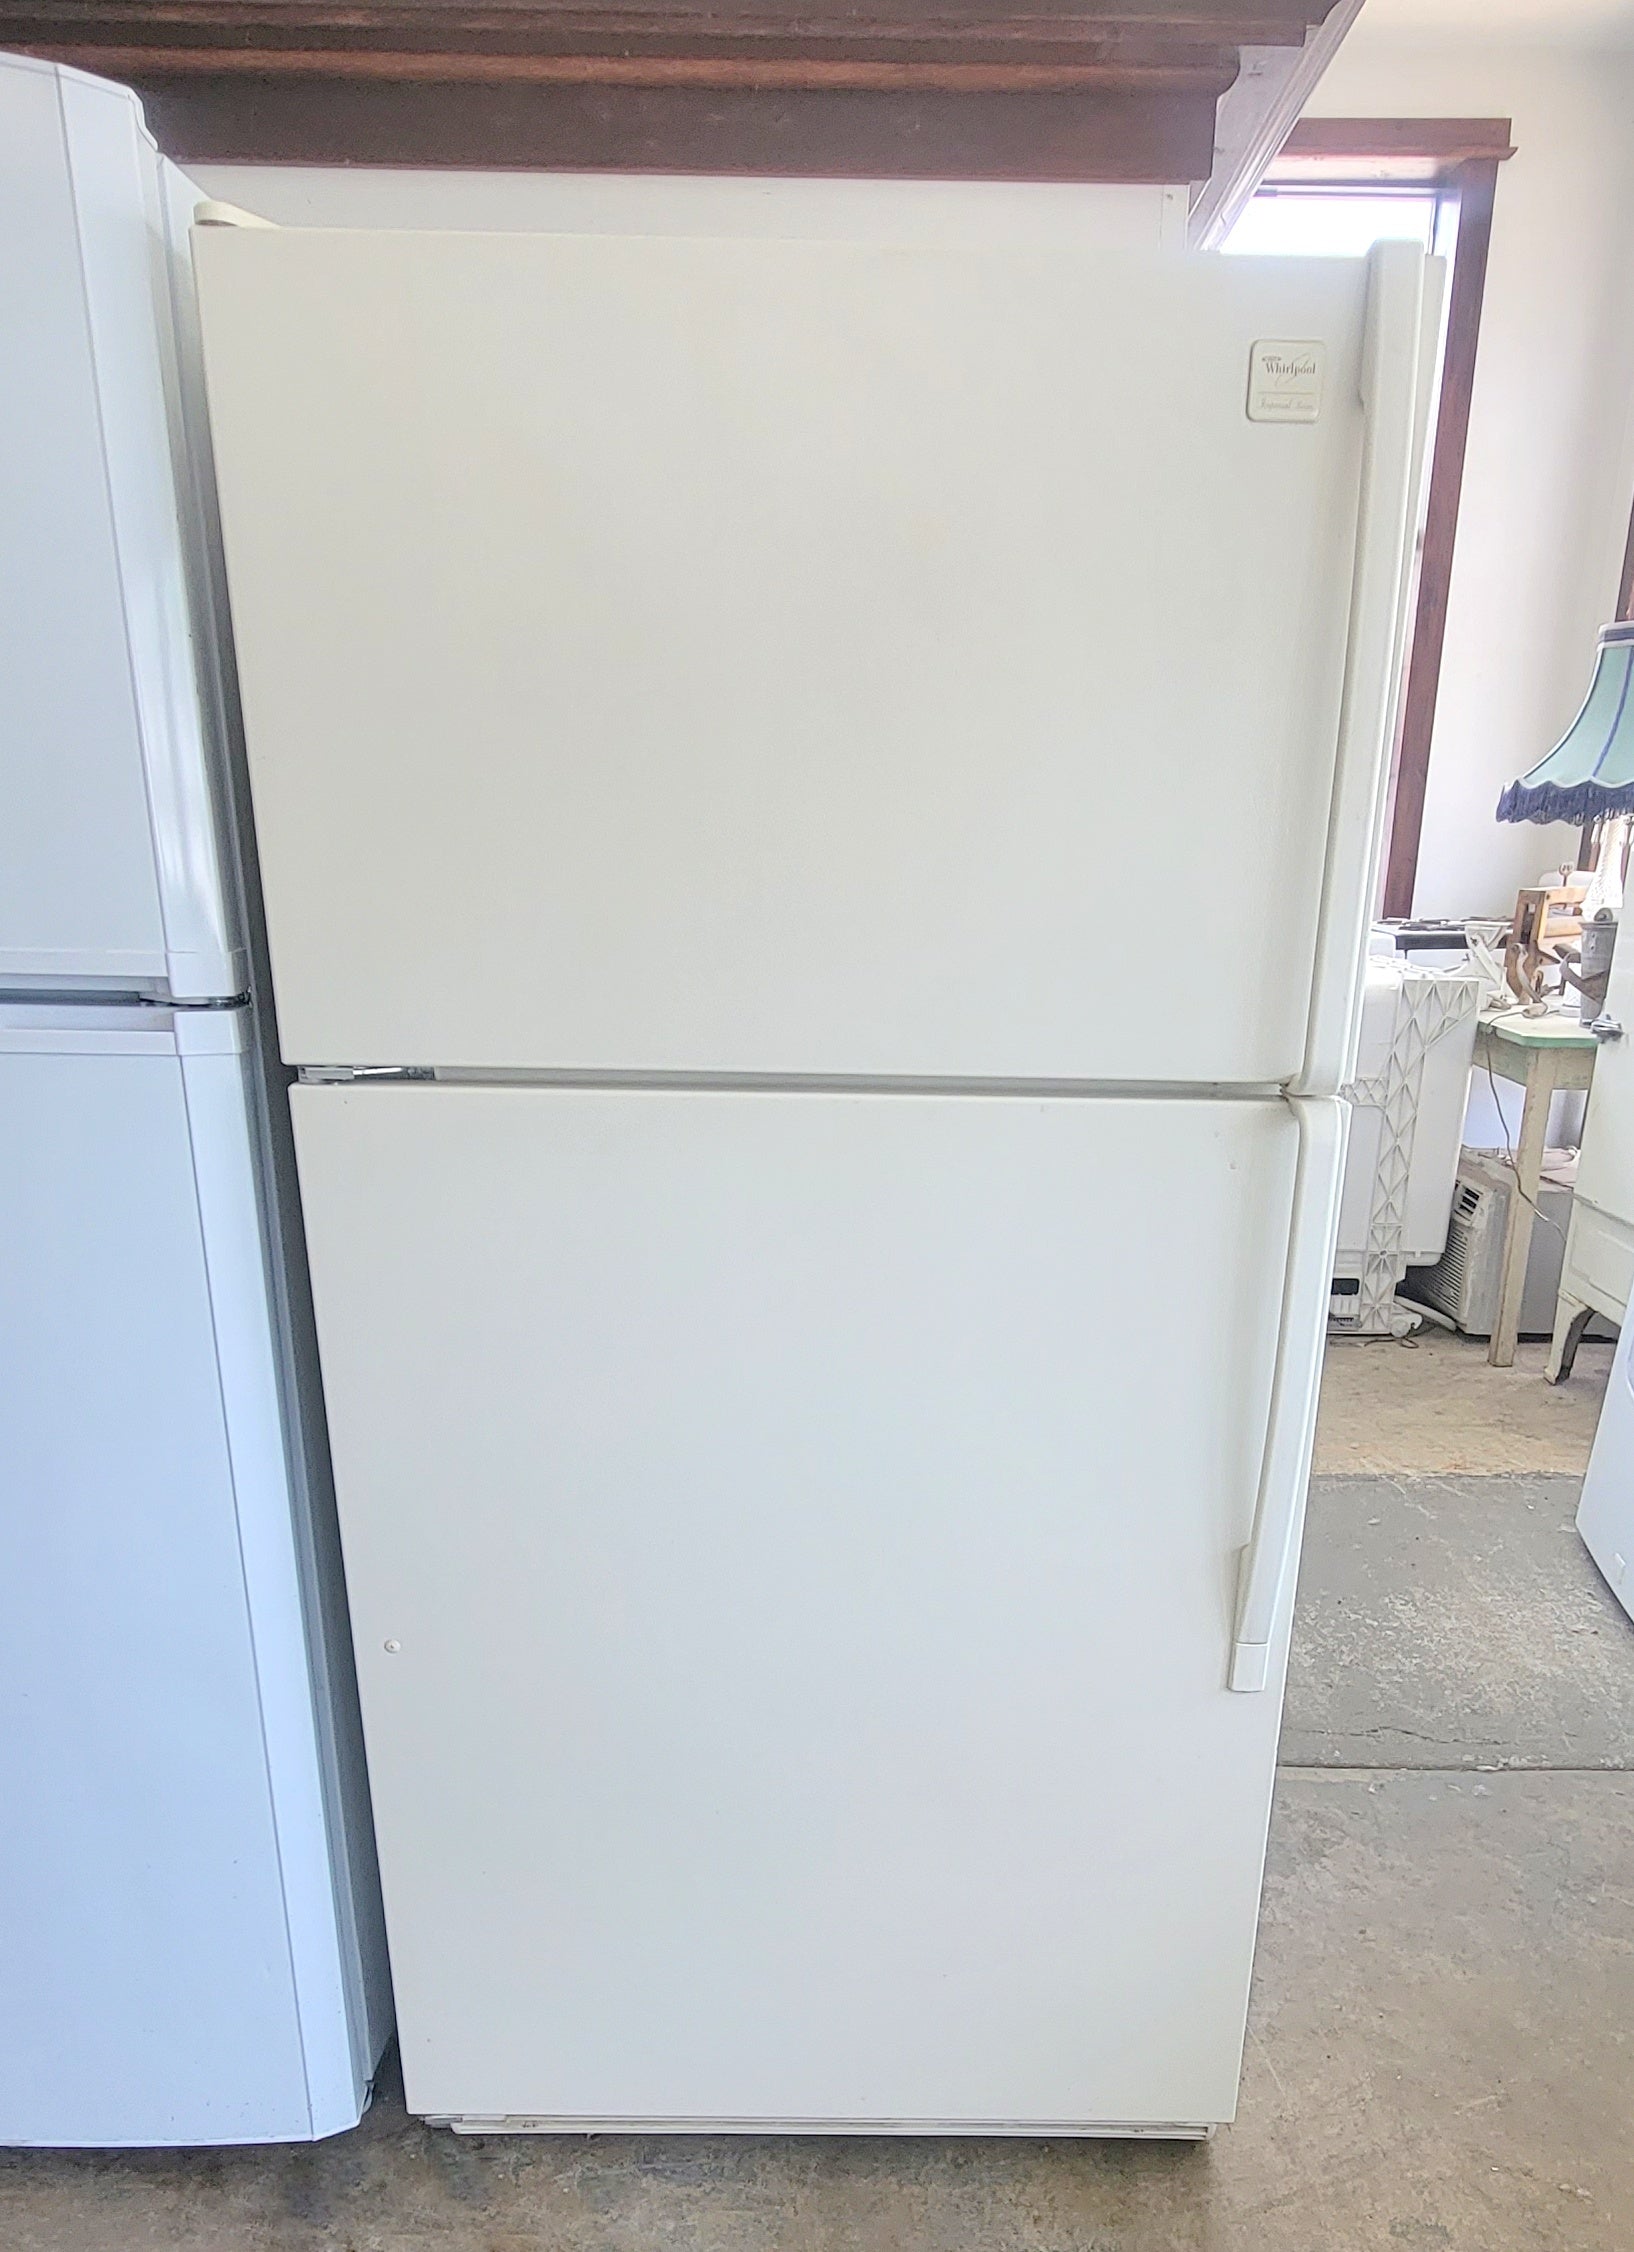 Used Reconditioned Whirlpool Bisque Refrigerator